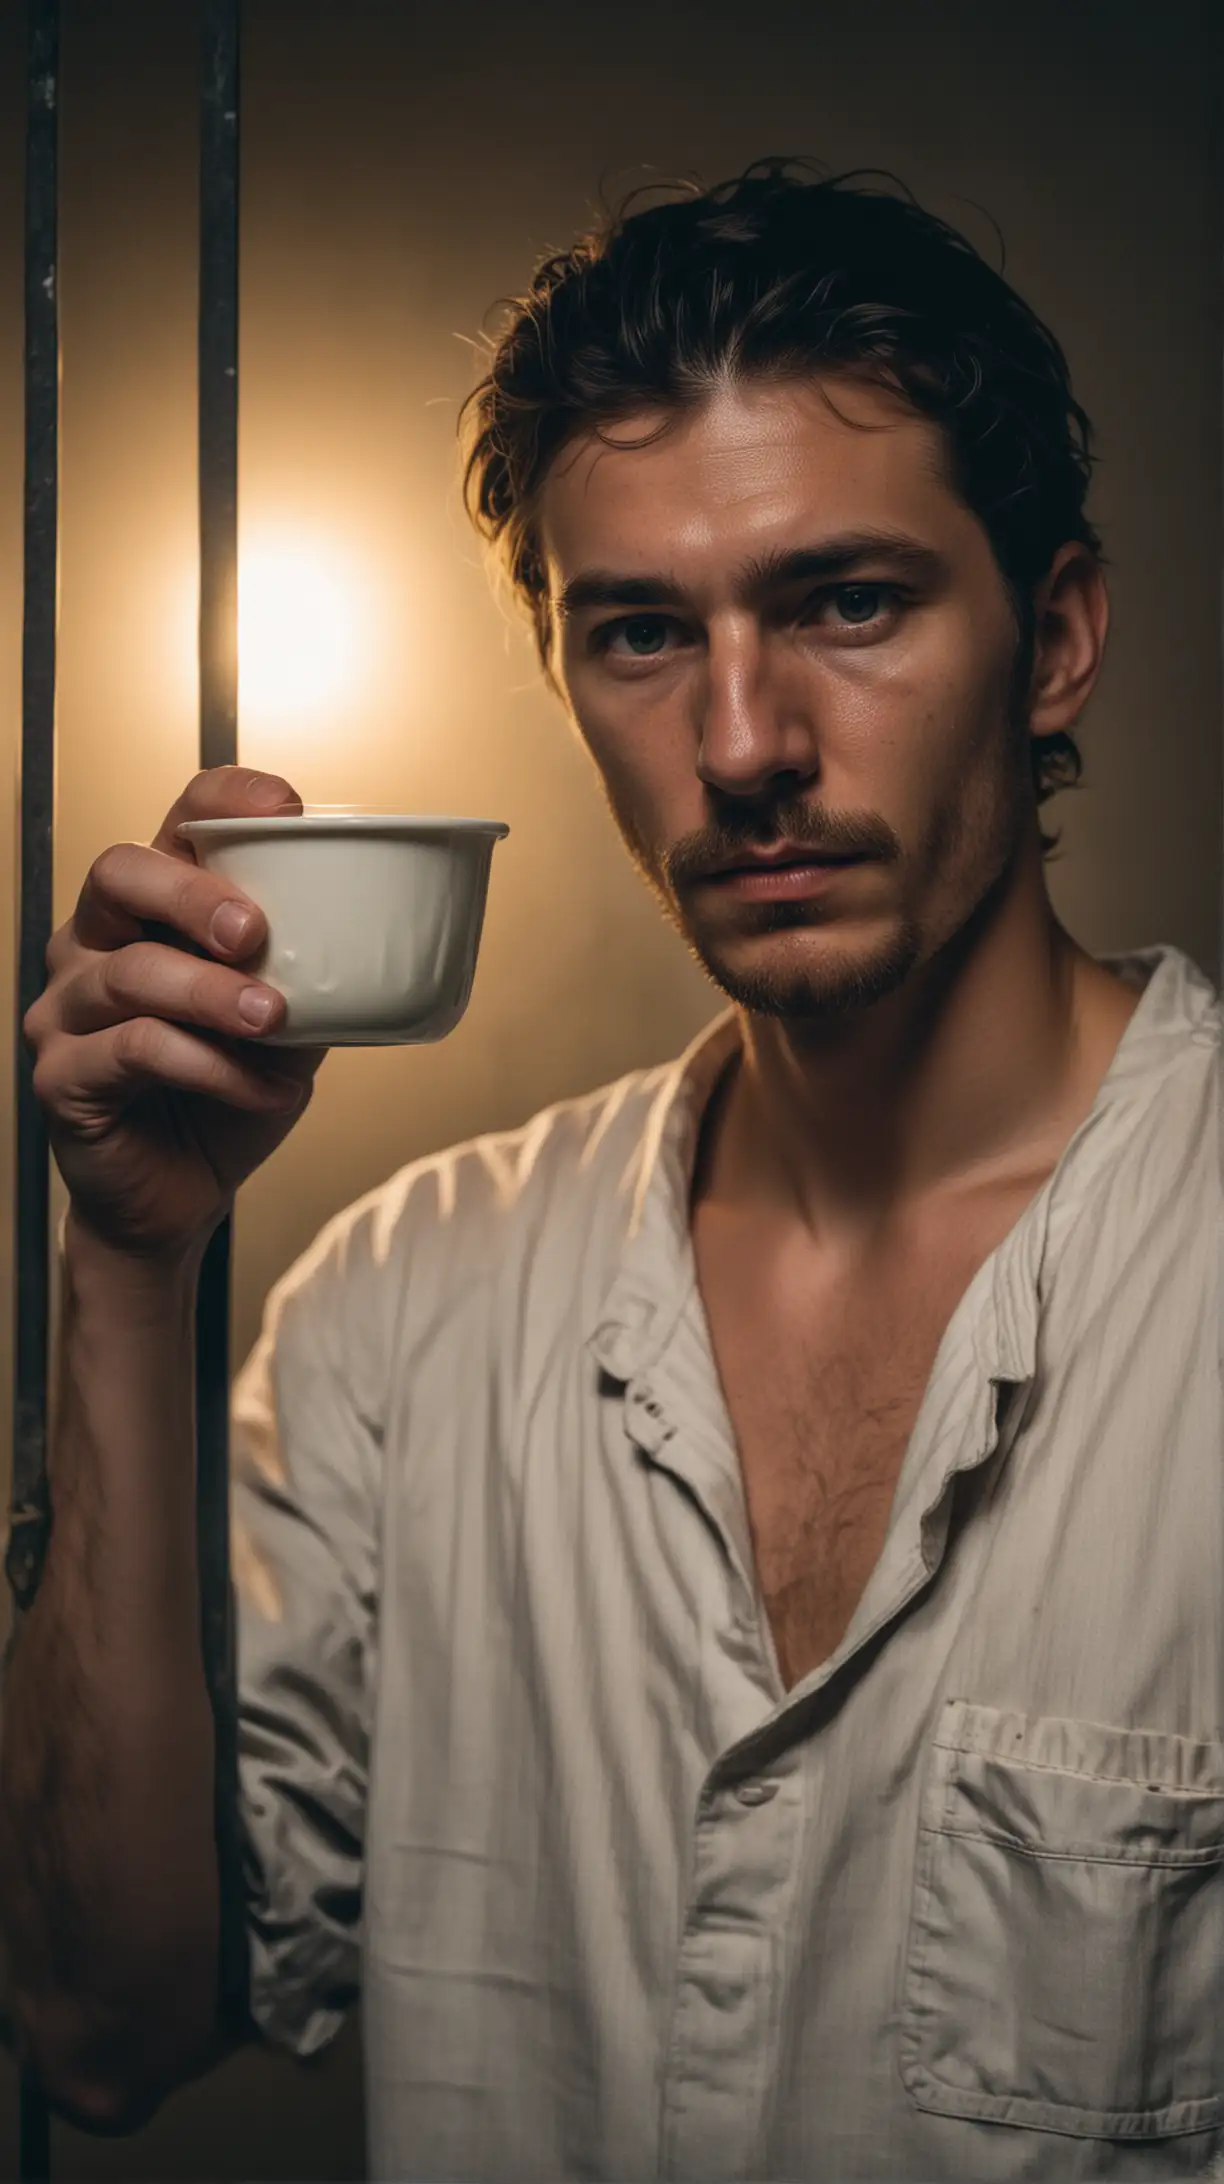 A convict holding a cup of yogurt in a dimly lit cell.